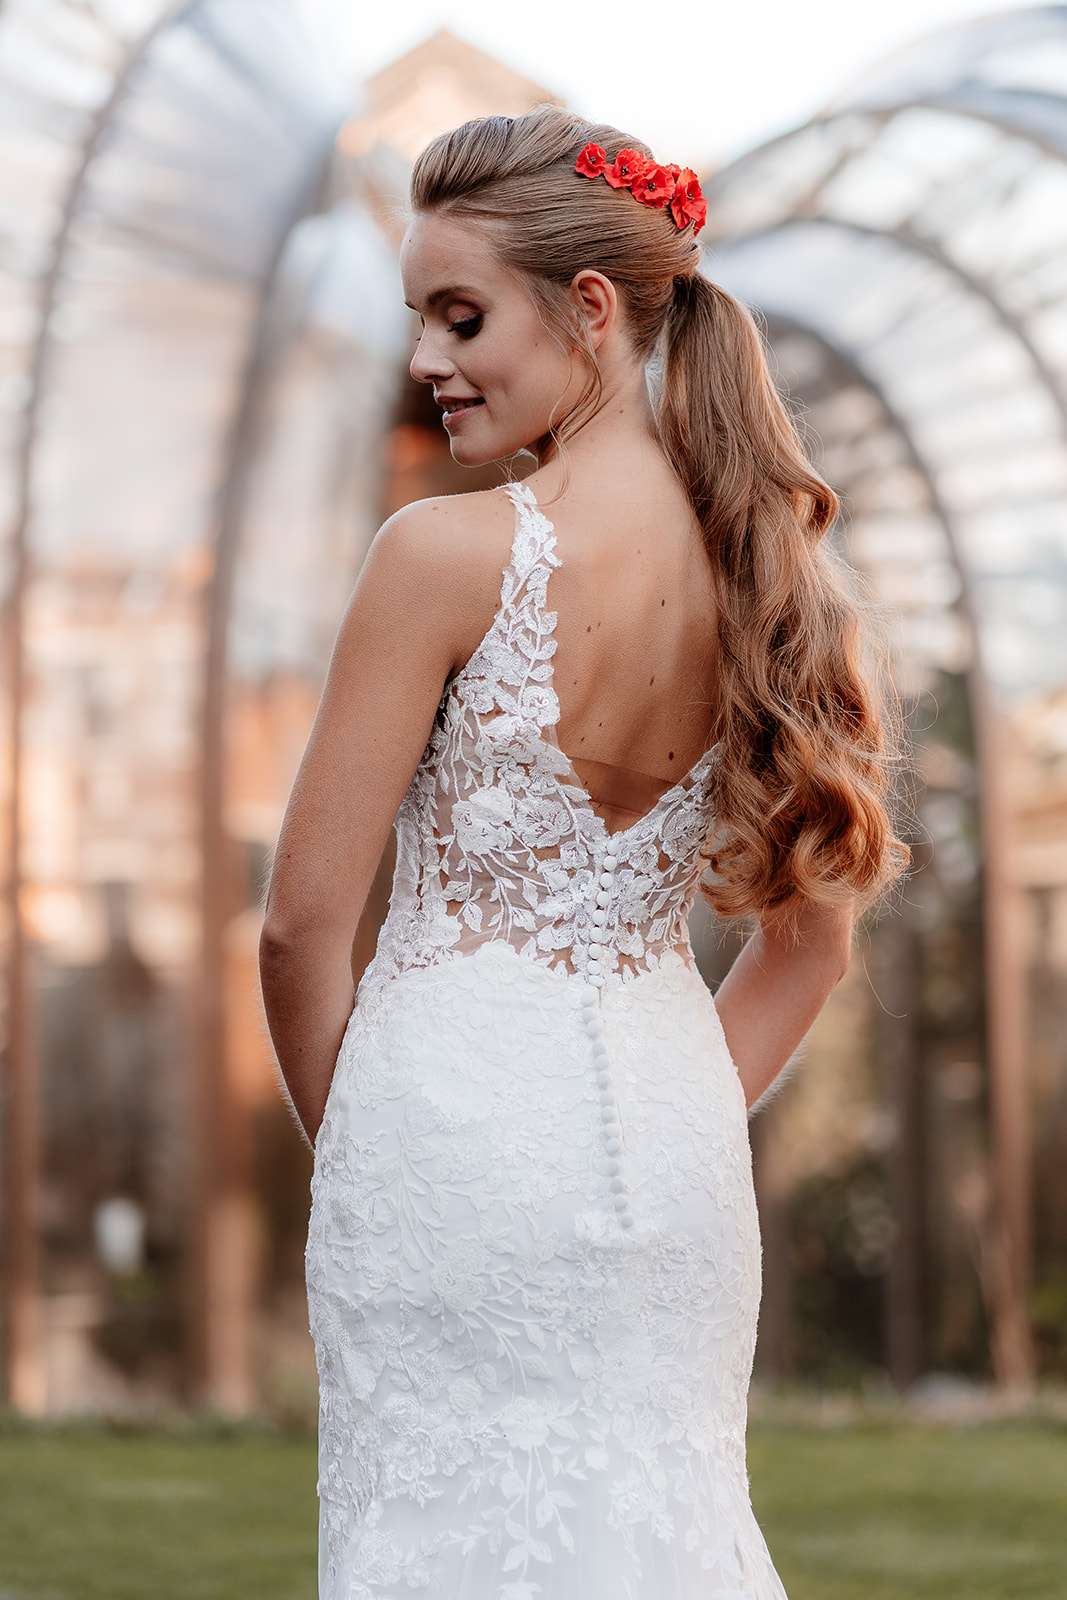 Bride in a white lace dress stands in front of the Bombay Sapphire Distillery Glasshouses. 